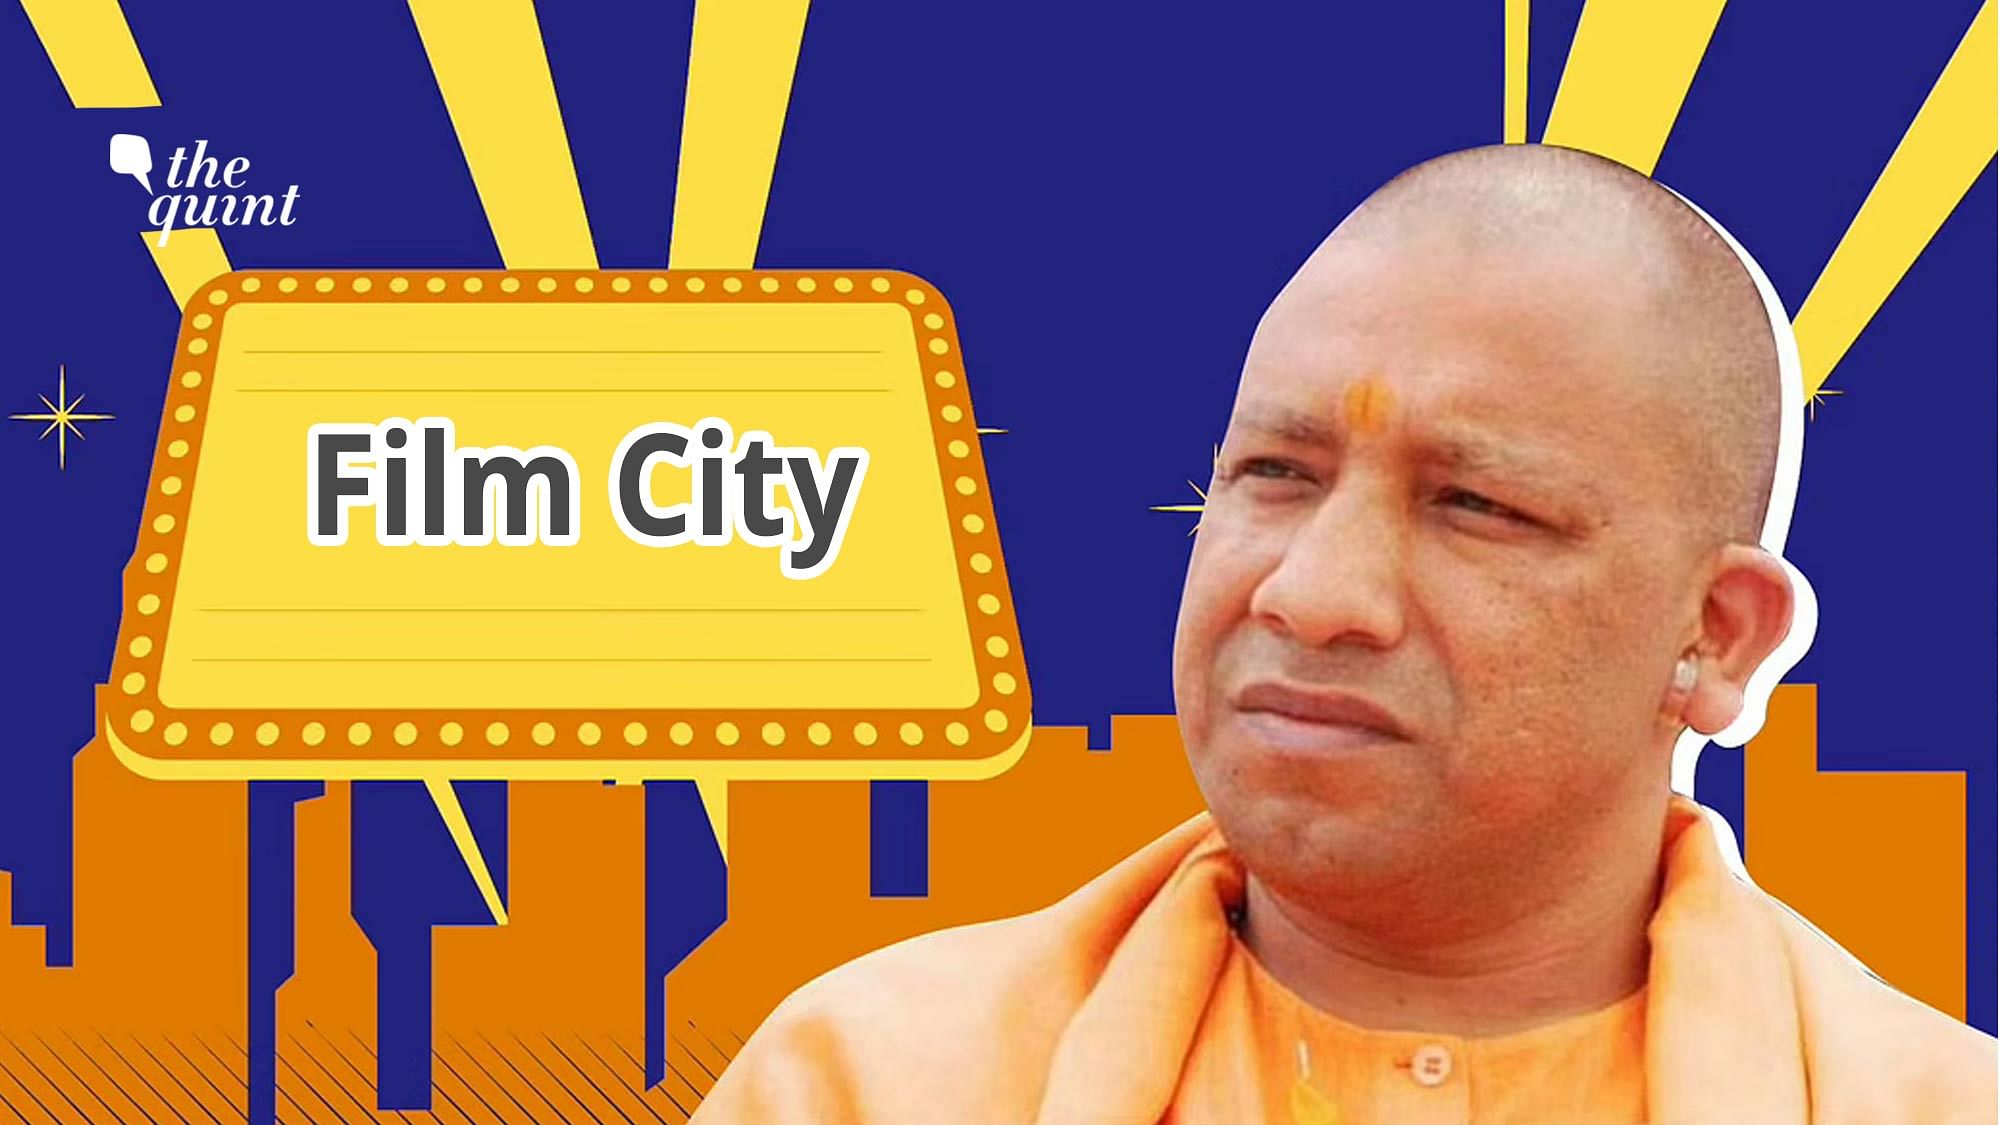 CM Yogi Adityanath, himself, seems very actively involved in setting up a Film City in UP.